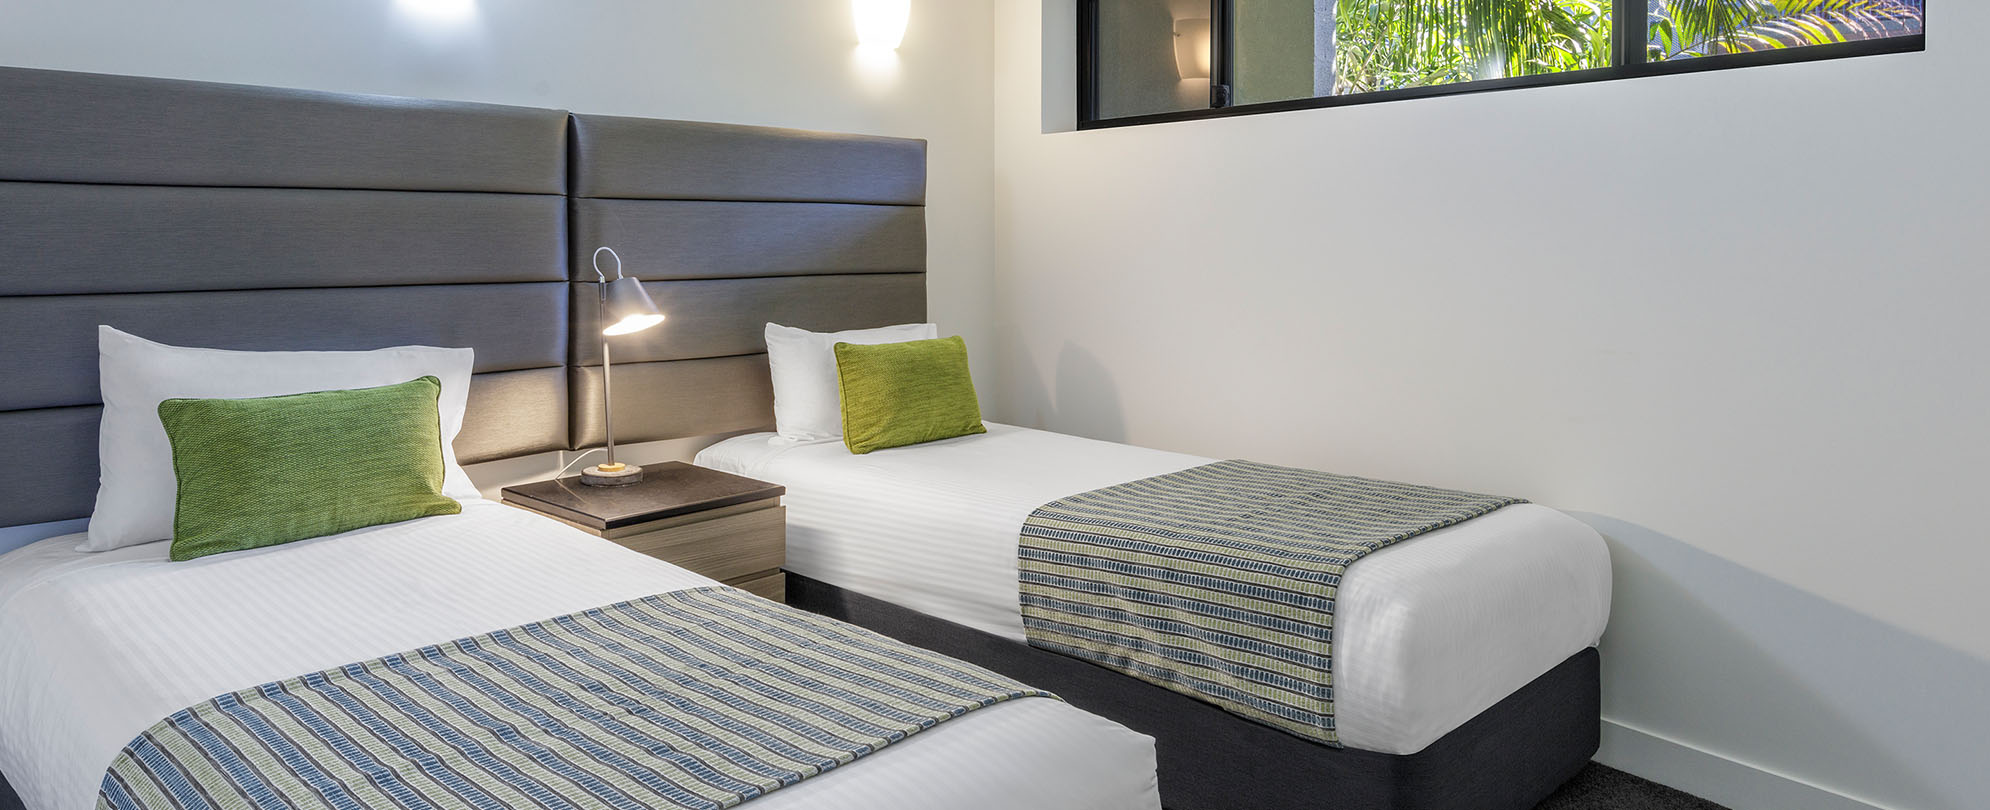 Two twin-sized beds in one of the rooms of a 2-bedroom grand suite at Club Wyndham Coffs Harbor.